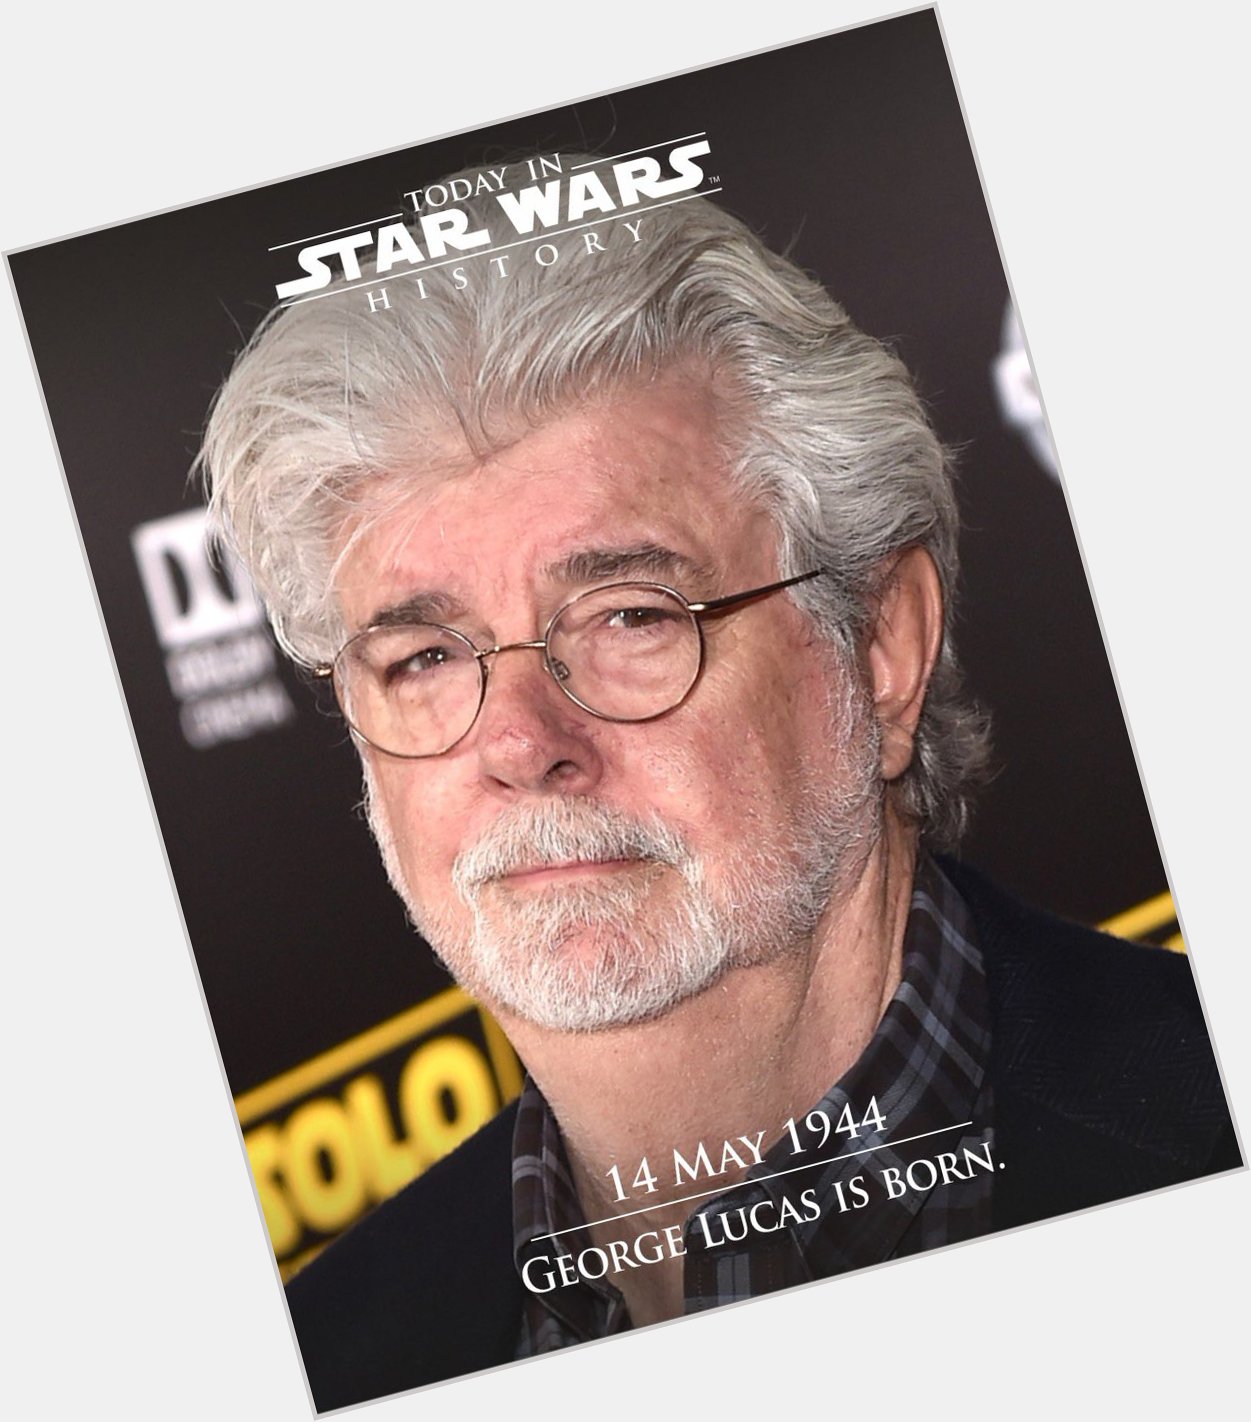 14 May 1944 Happy birthday to The Maker himself, George Lucas! 